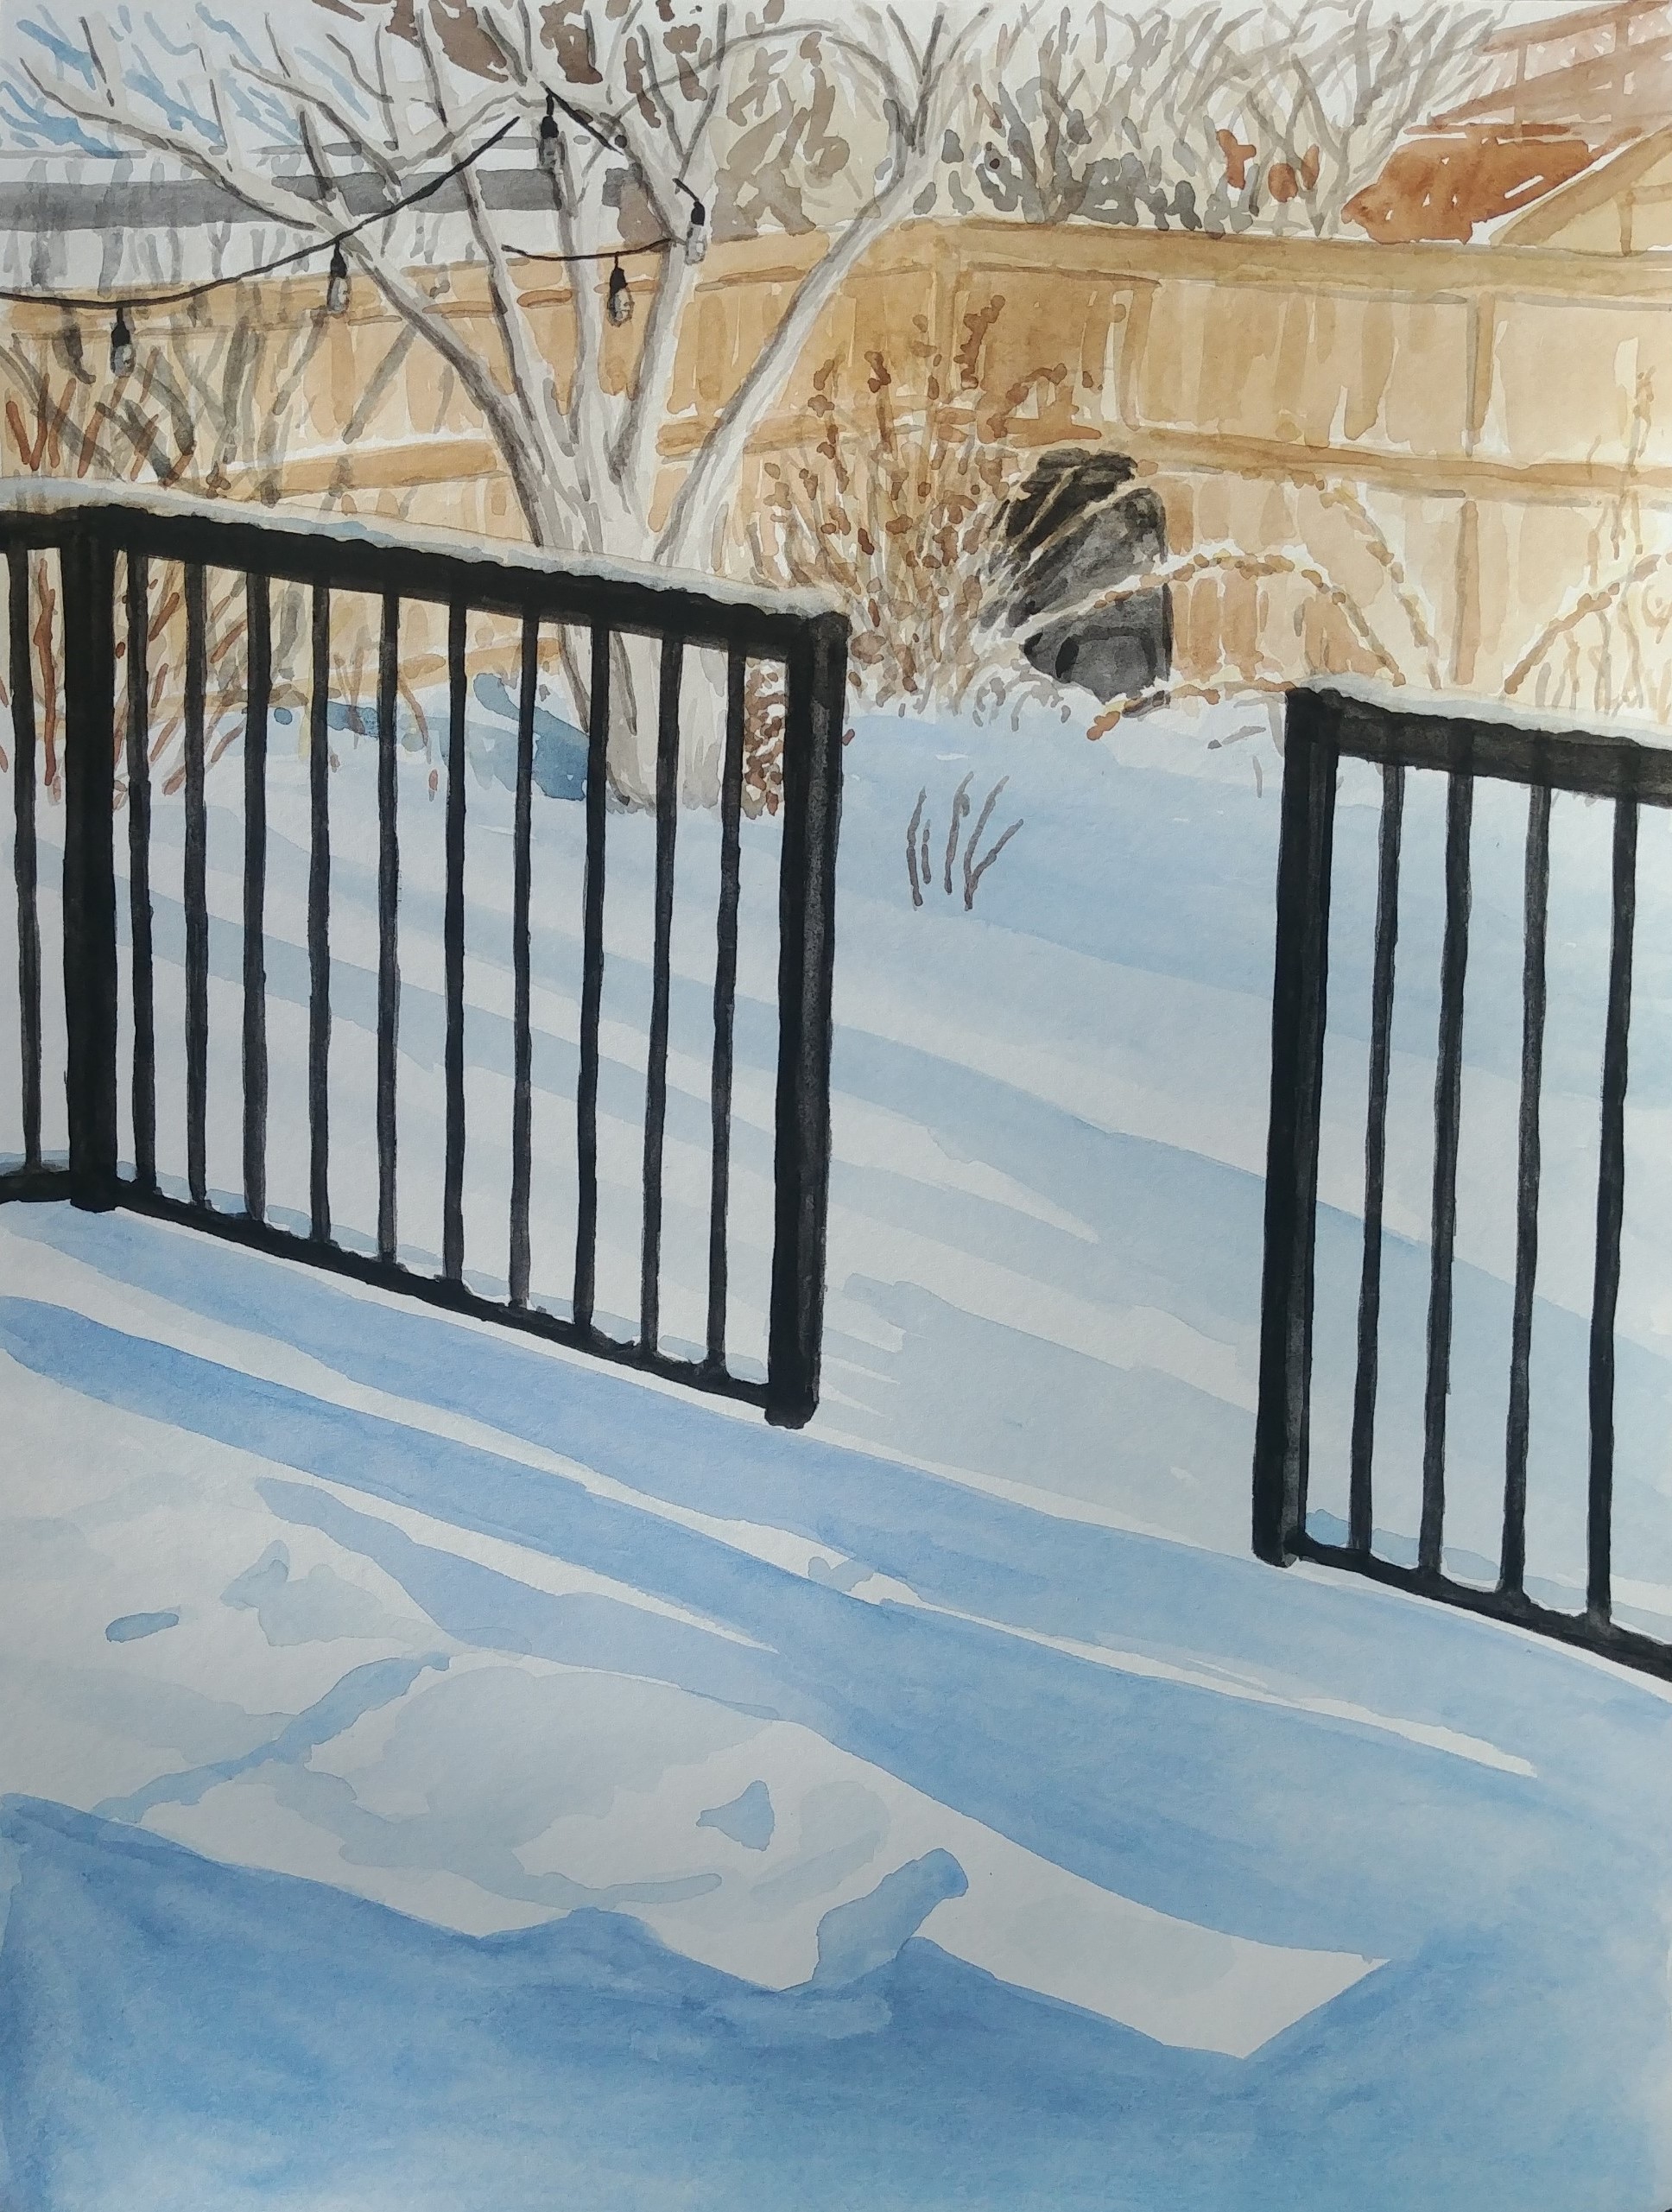 Snow in the Backyard, Feb. 6, 2019, watercolour on paper